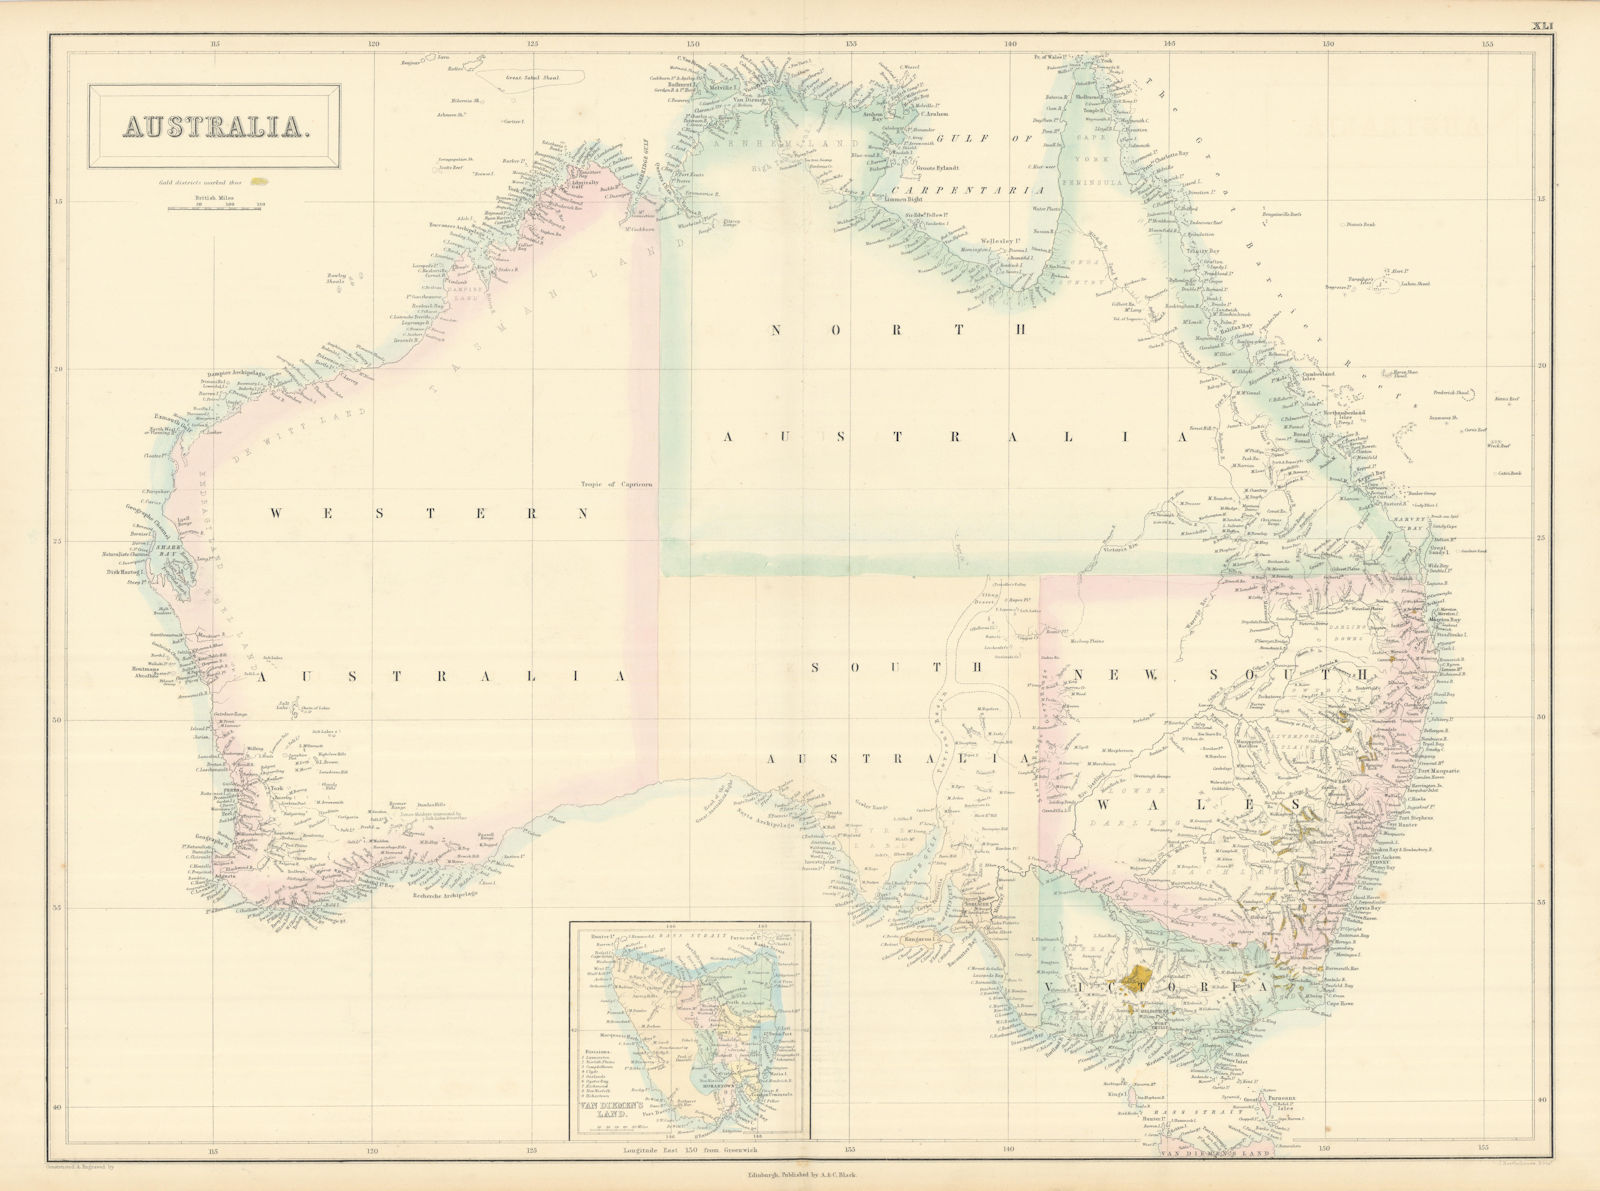 Gold rush Australia showing gold districts in yellow. SIDNEY HALL 1854 map